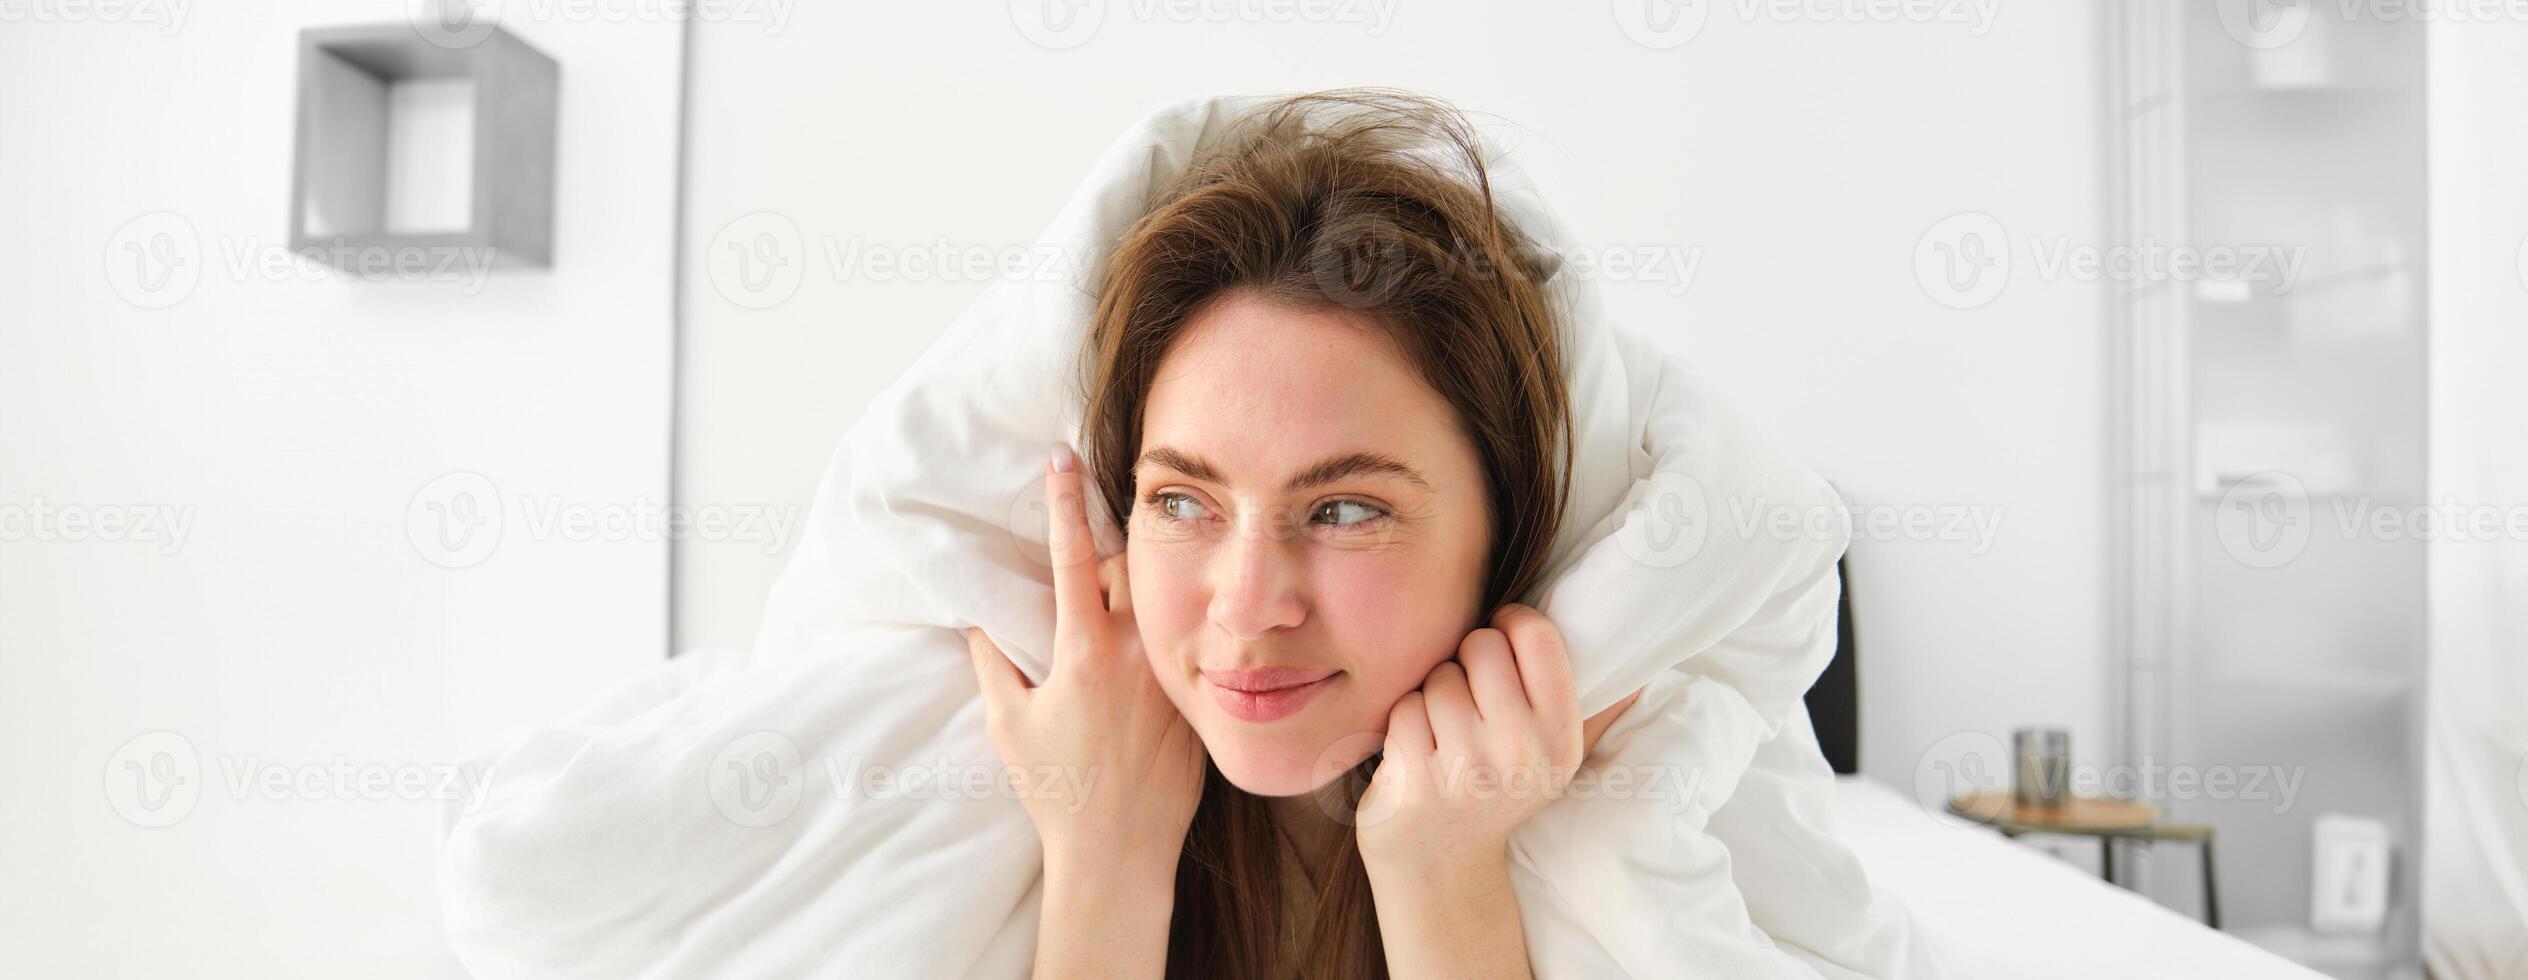 Cute girl with messy hair, lying in bed covered in white sheets duvet, smiling and laughing coquettish, spending time in her bedroom photo